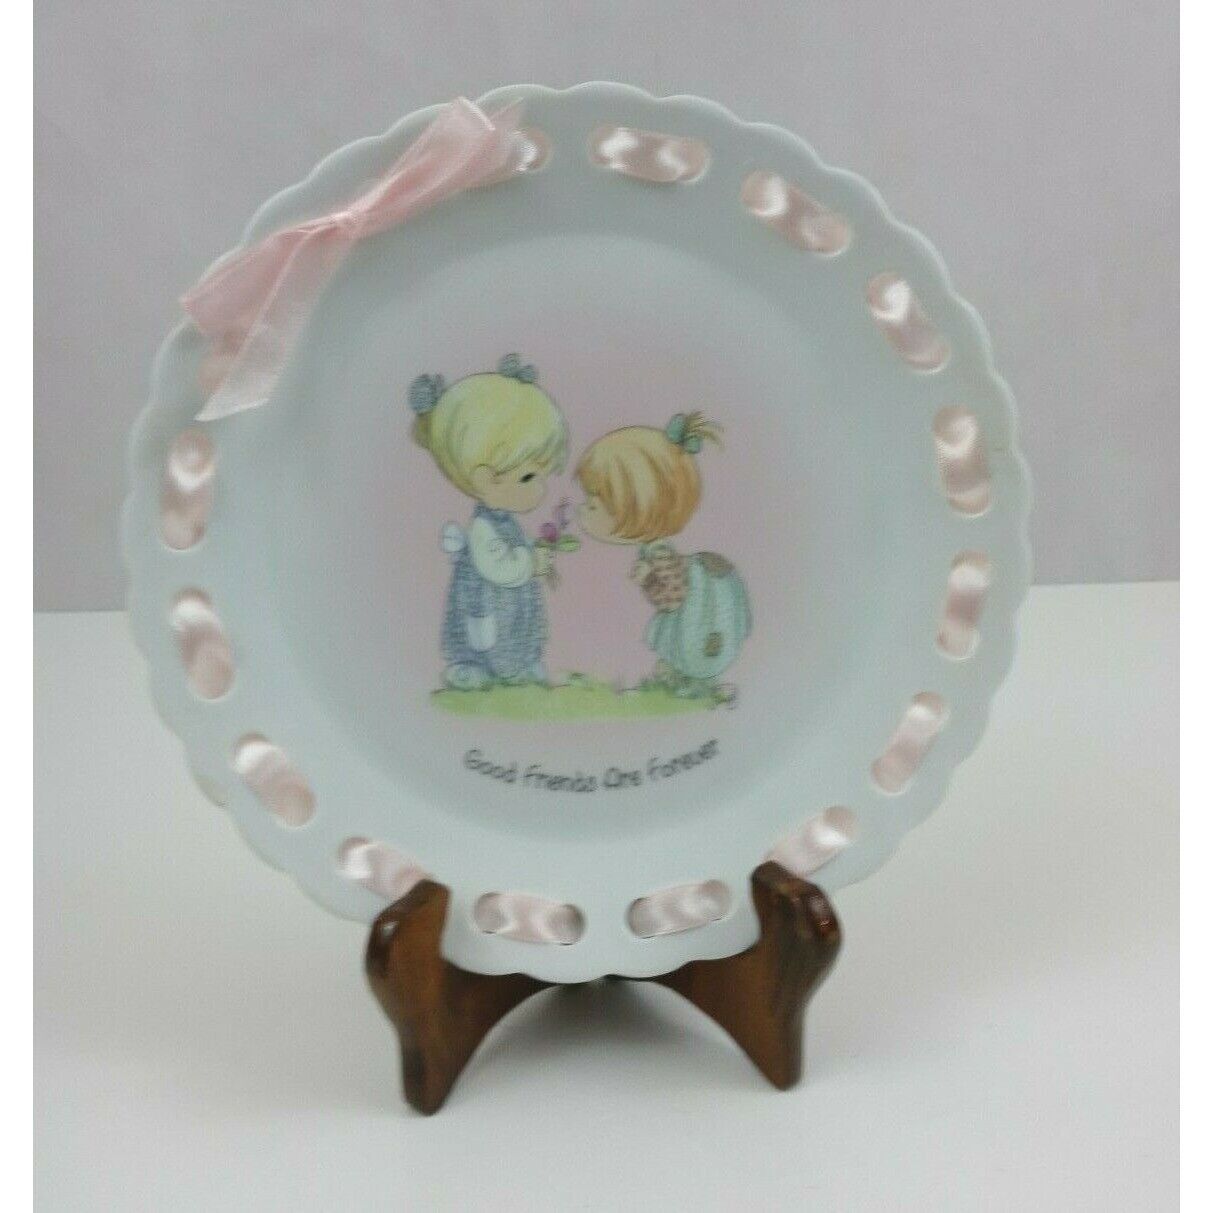 2004 Enesco Precious Moments Good Friends Are Forever Collector Plate With Stand - $10.66